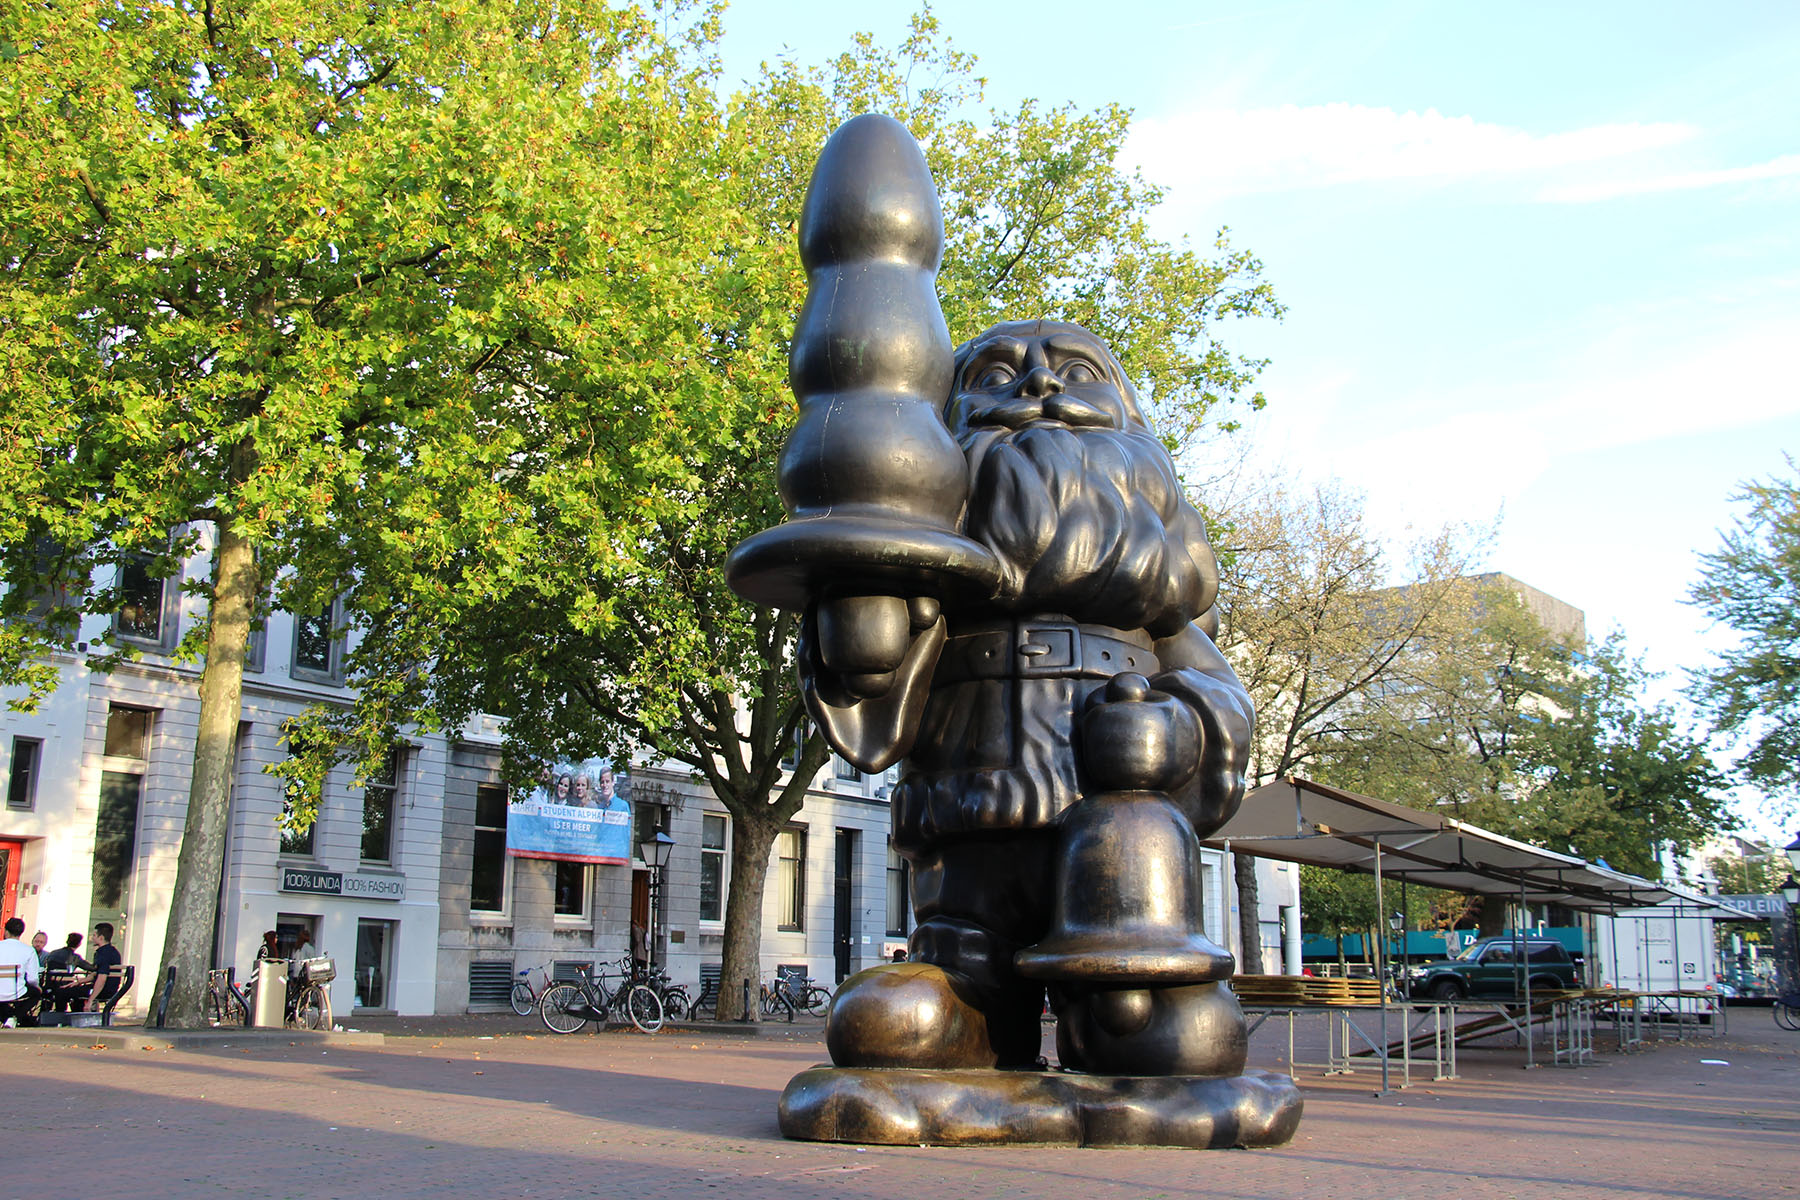 The Santa Claus by Paul McCarthy is a giant Santa Clause holding a Christmas tree in the middle of Rotterdam, and should be seen as a comment on the commercialization of Christmas. However, for obvious reasons, most people in the Netherlands know it as Gnome Buttplug.